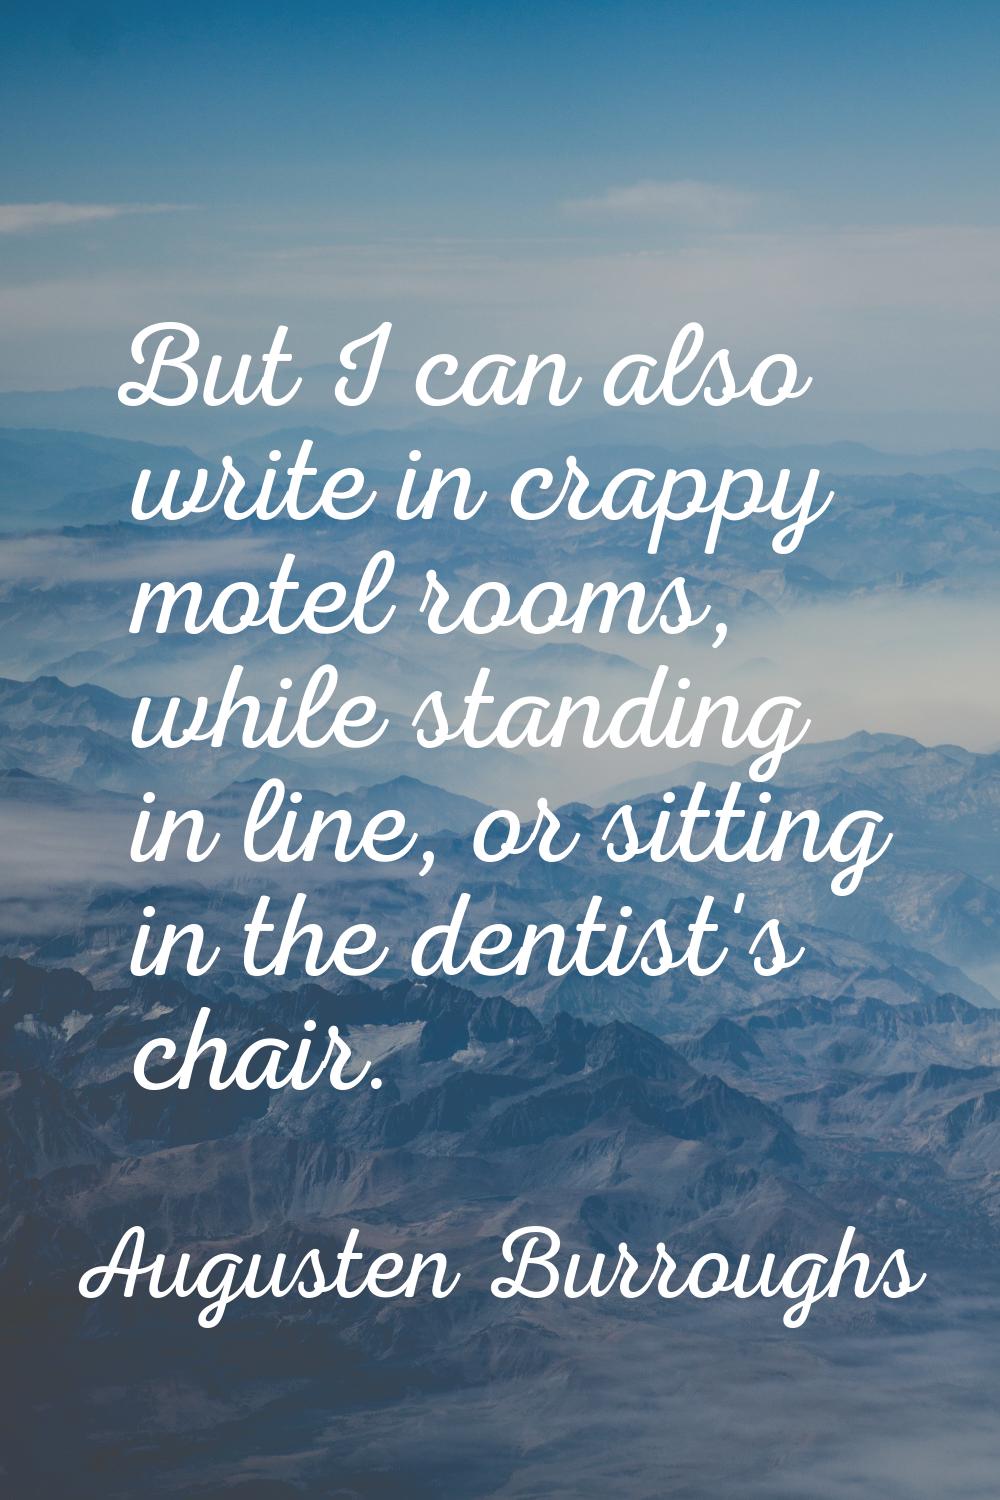 But I can also write in crappy motel rooms, while standing in line, or sitting in the dentist's cha